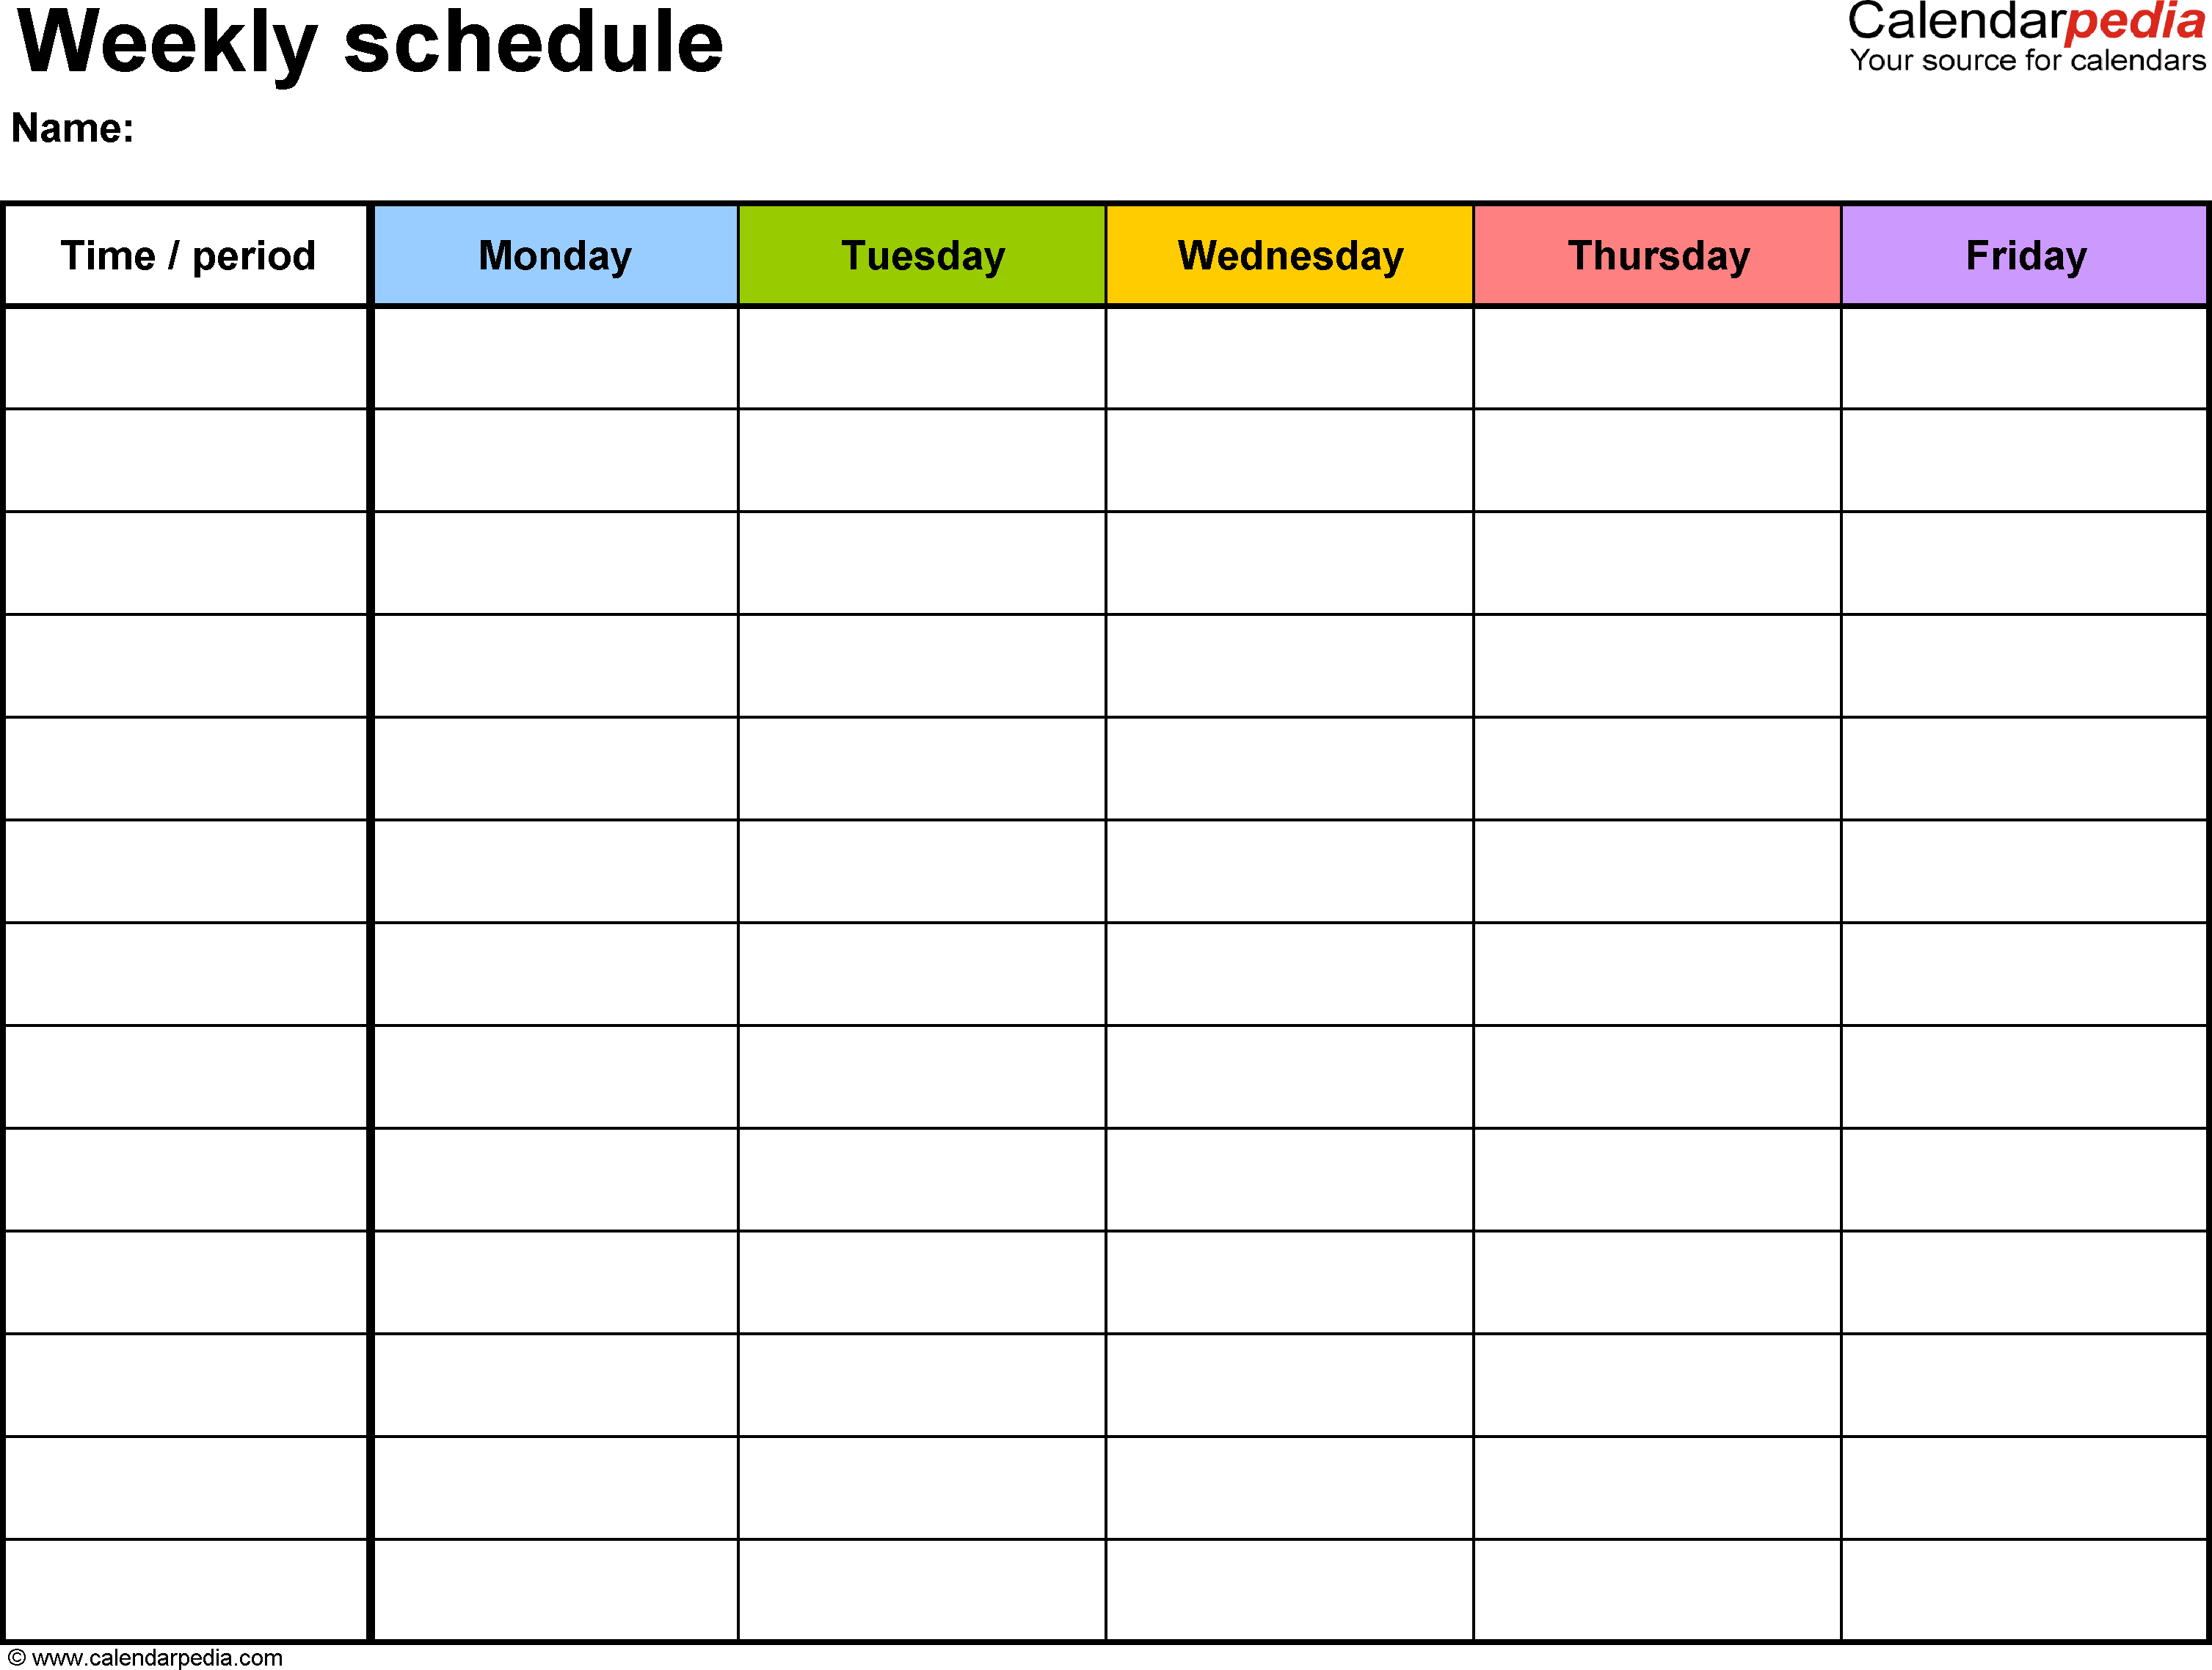 Free Weekly Schedule Templates For Word - 18 Templates - Free Printable Daily Schedule Chart